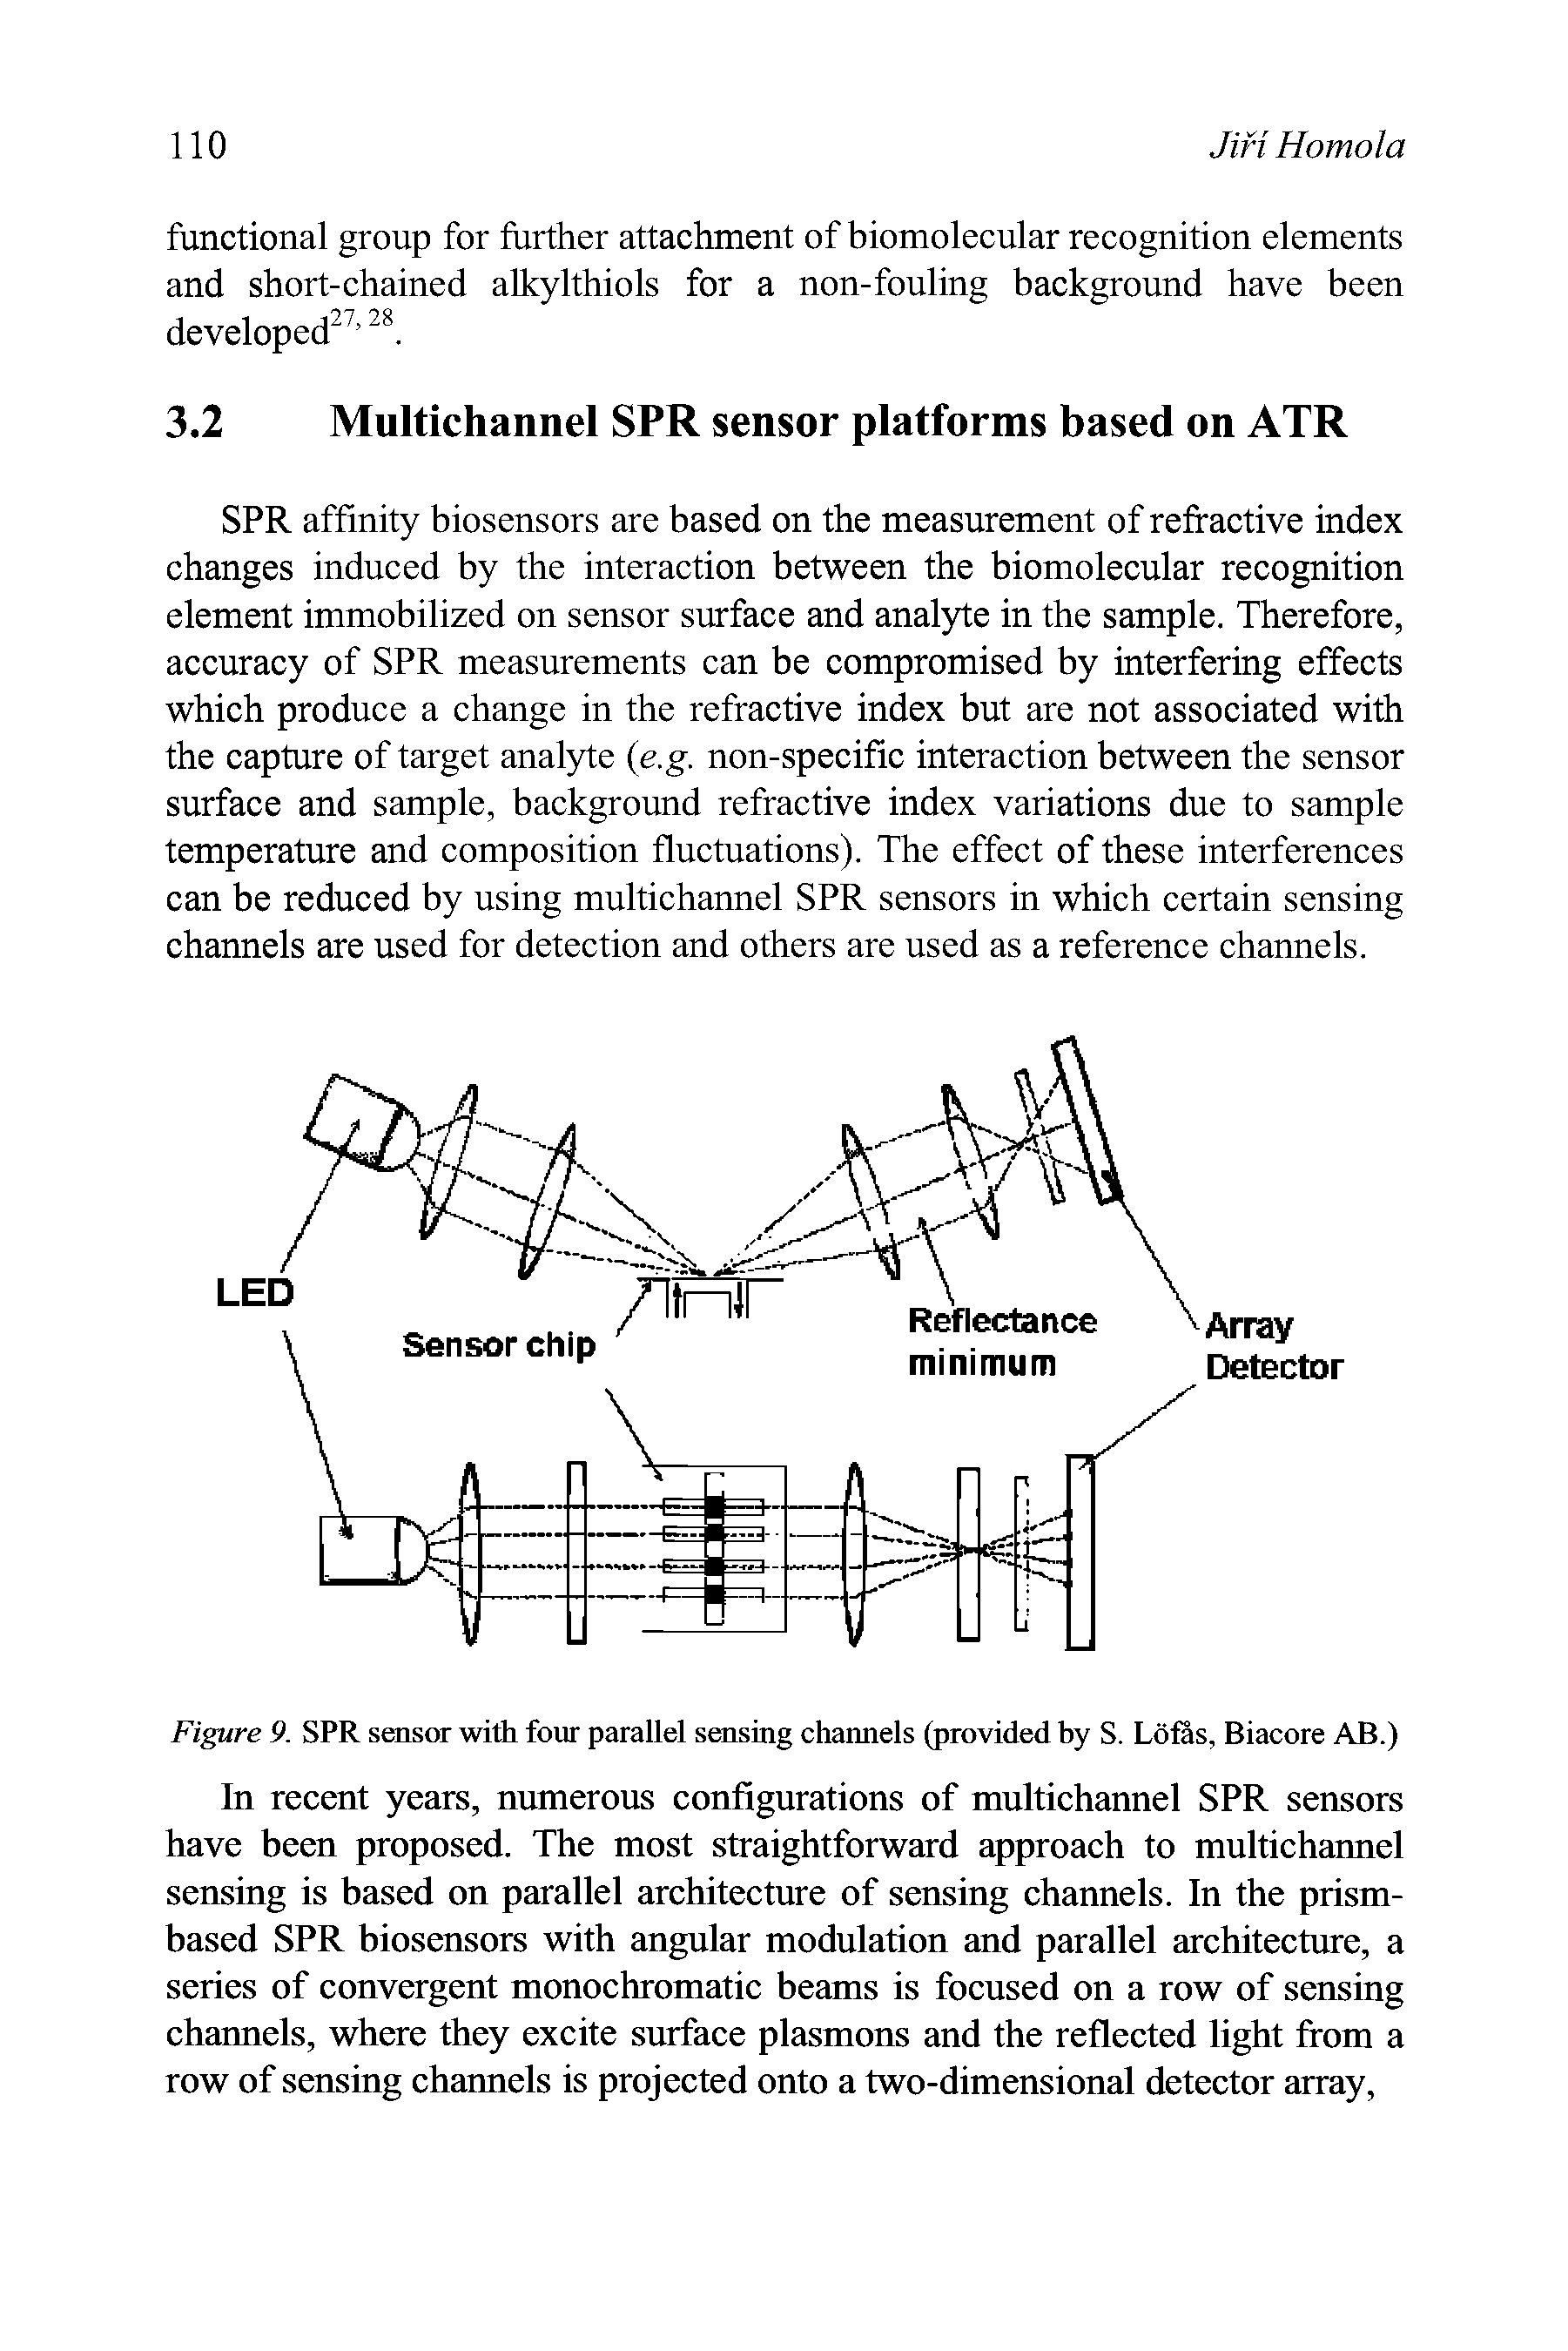 Figure 9. SPR sensor with four parallel sensing channels (provided hy S. Lolas, Biacore AB.)...